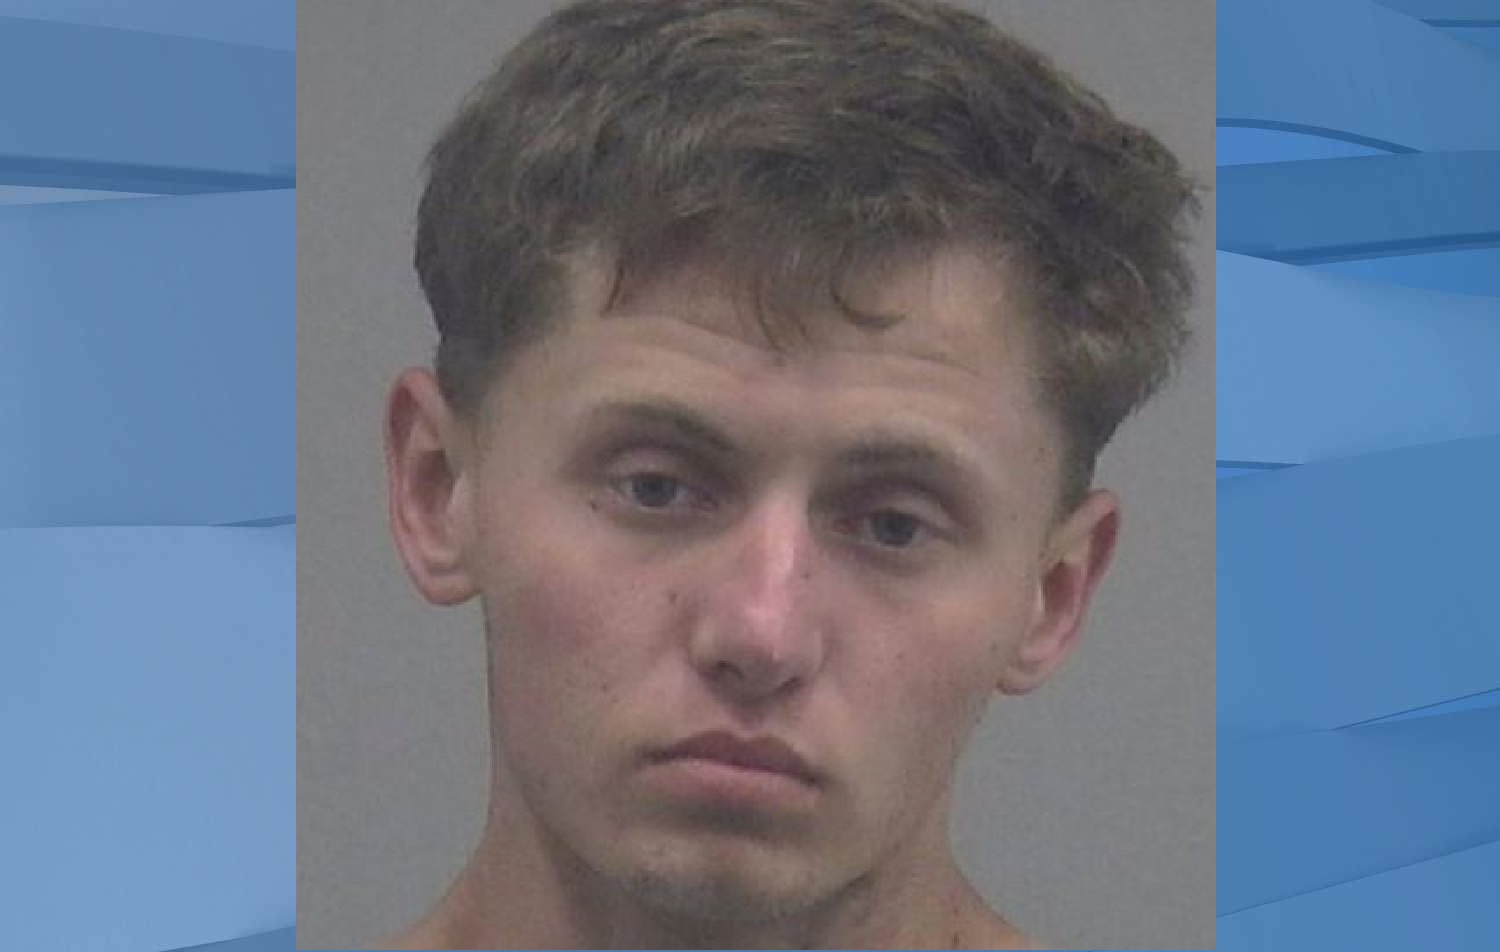 Mugshot of Jared Parker. (Credit Alachua County Sheriff's Office)